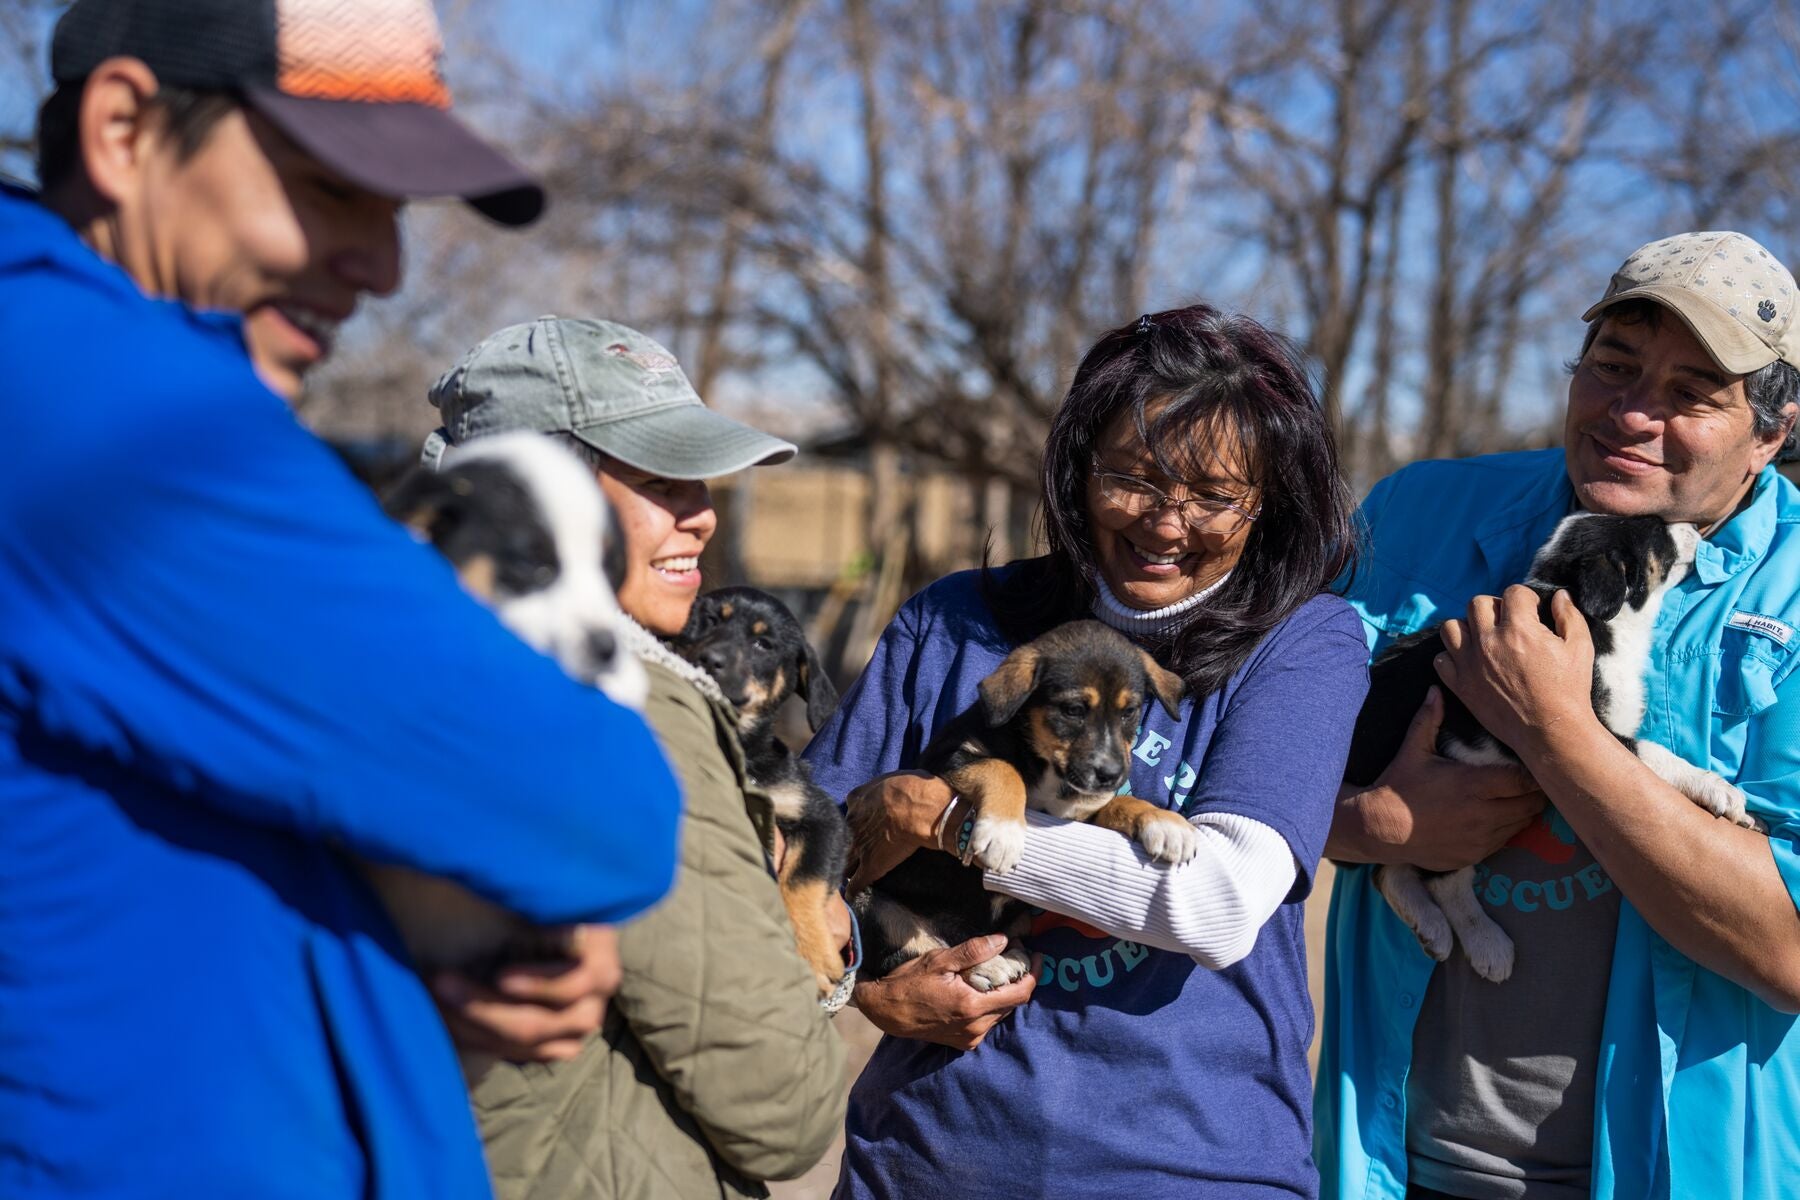 Vernan Kee and members of a dog rescue organization hold puppies who have been rescued.